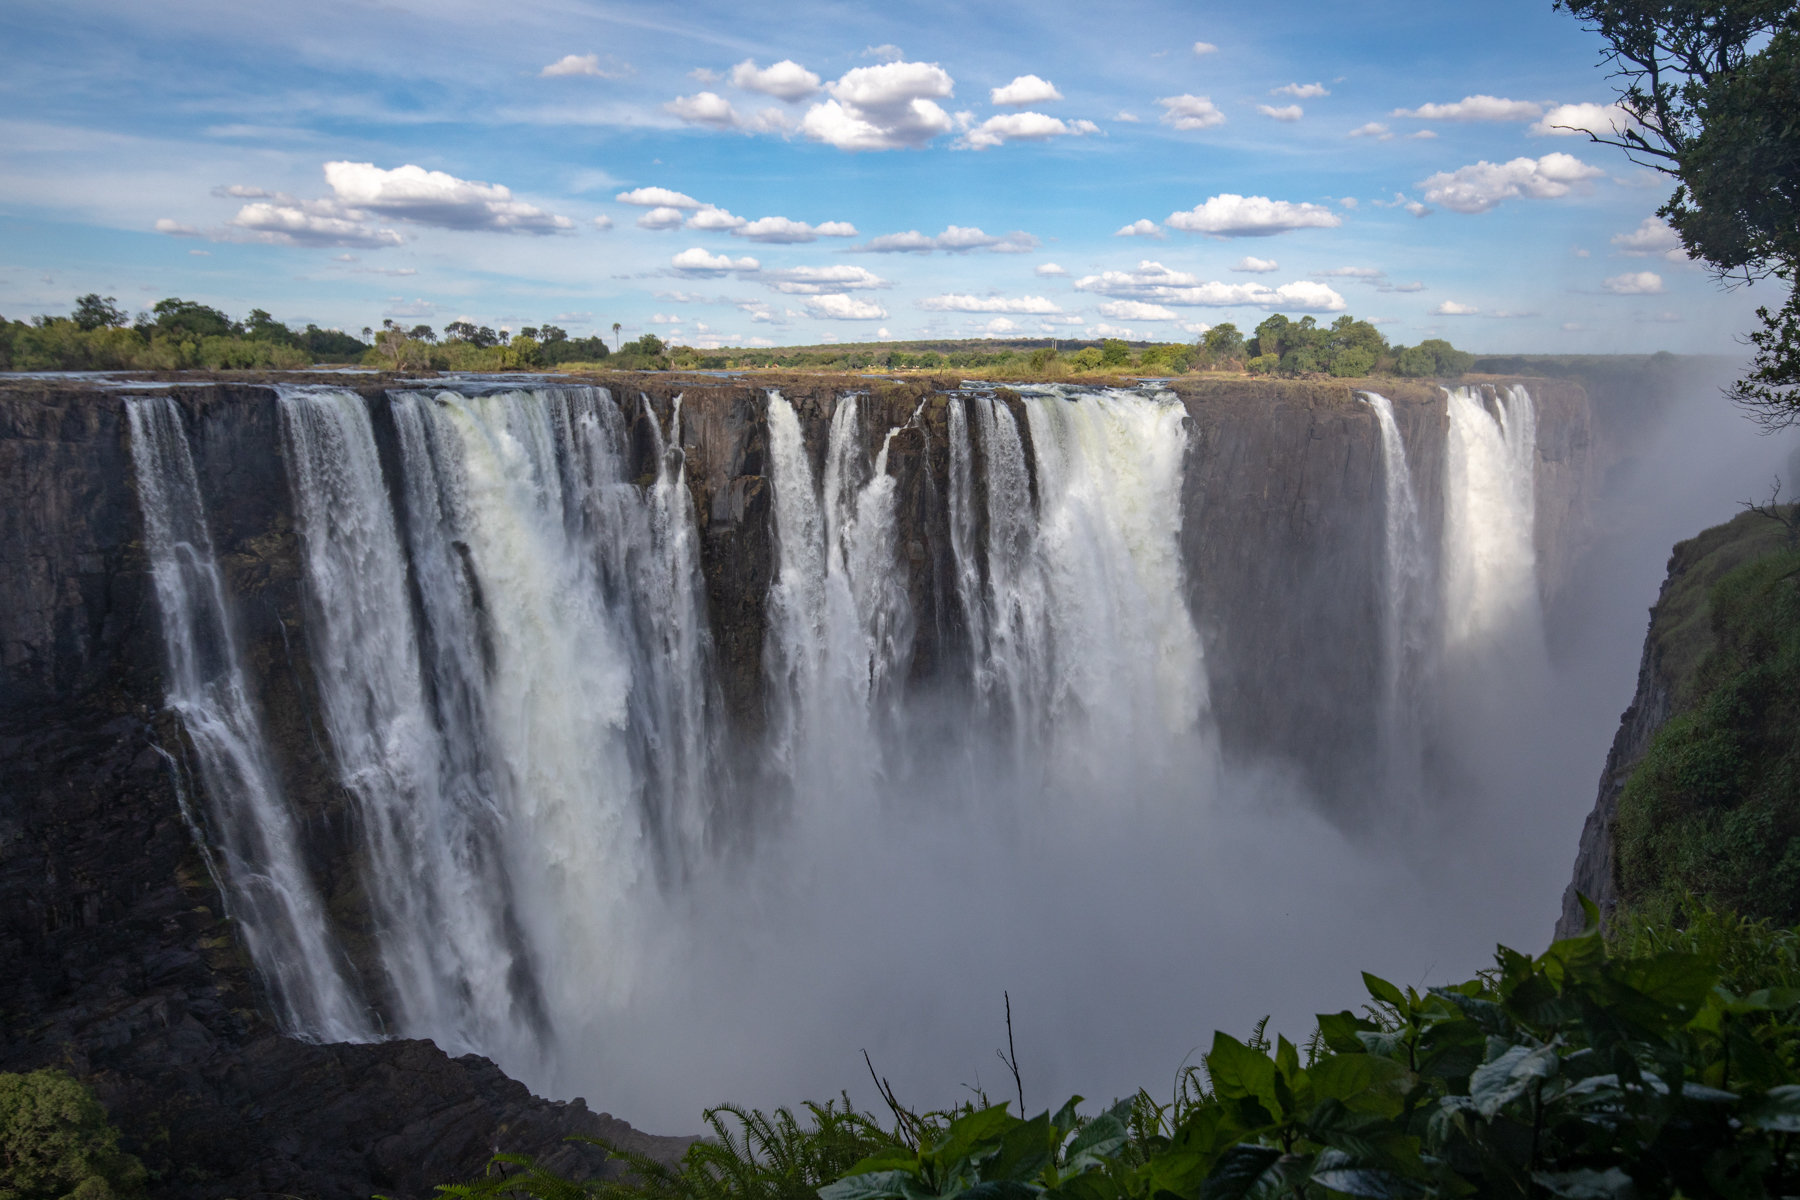 An impressive section of the Victoria Falls